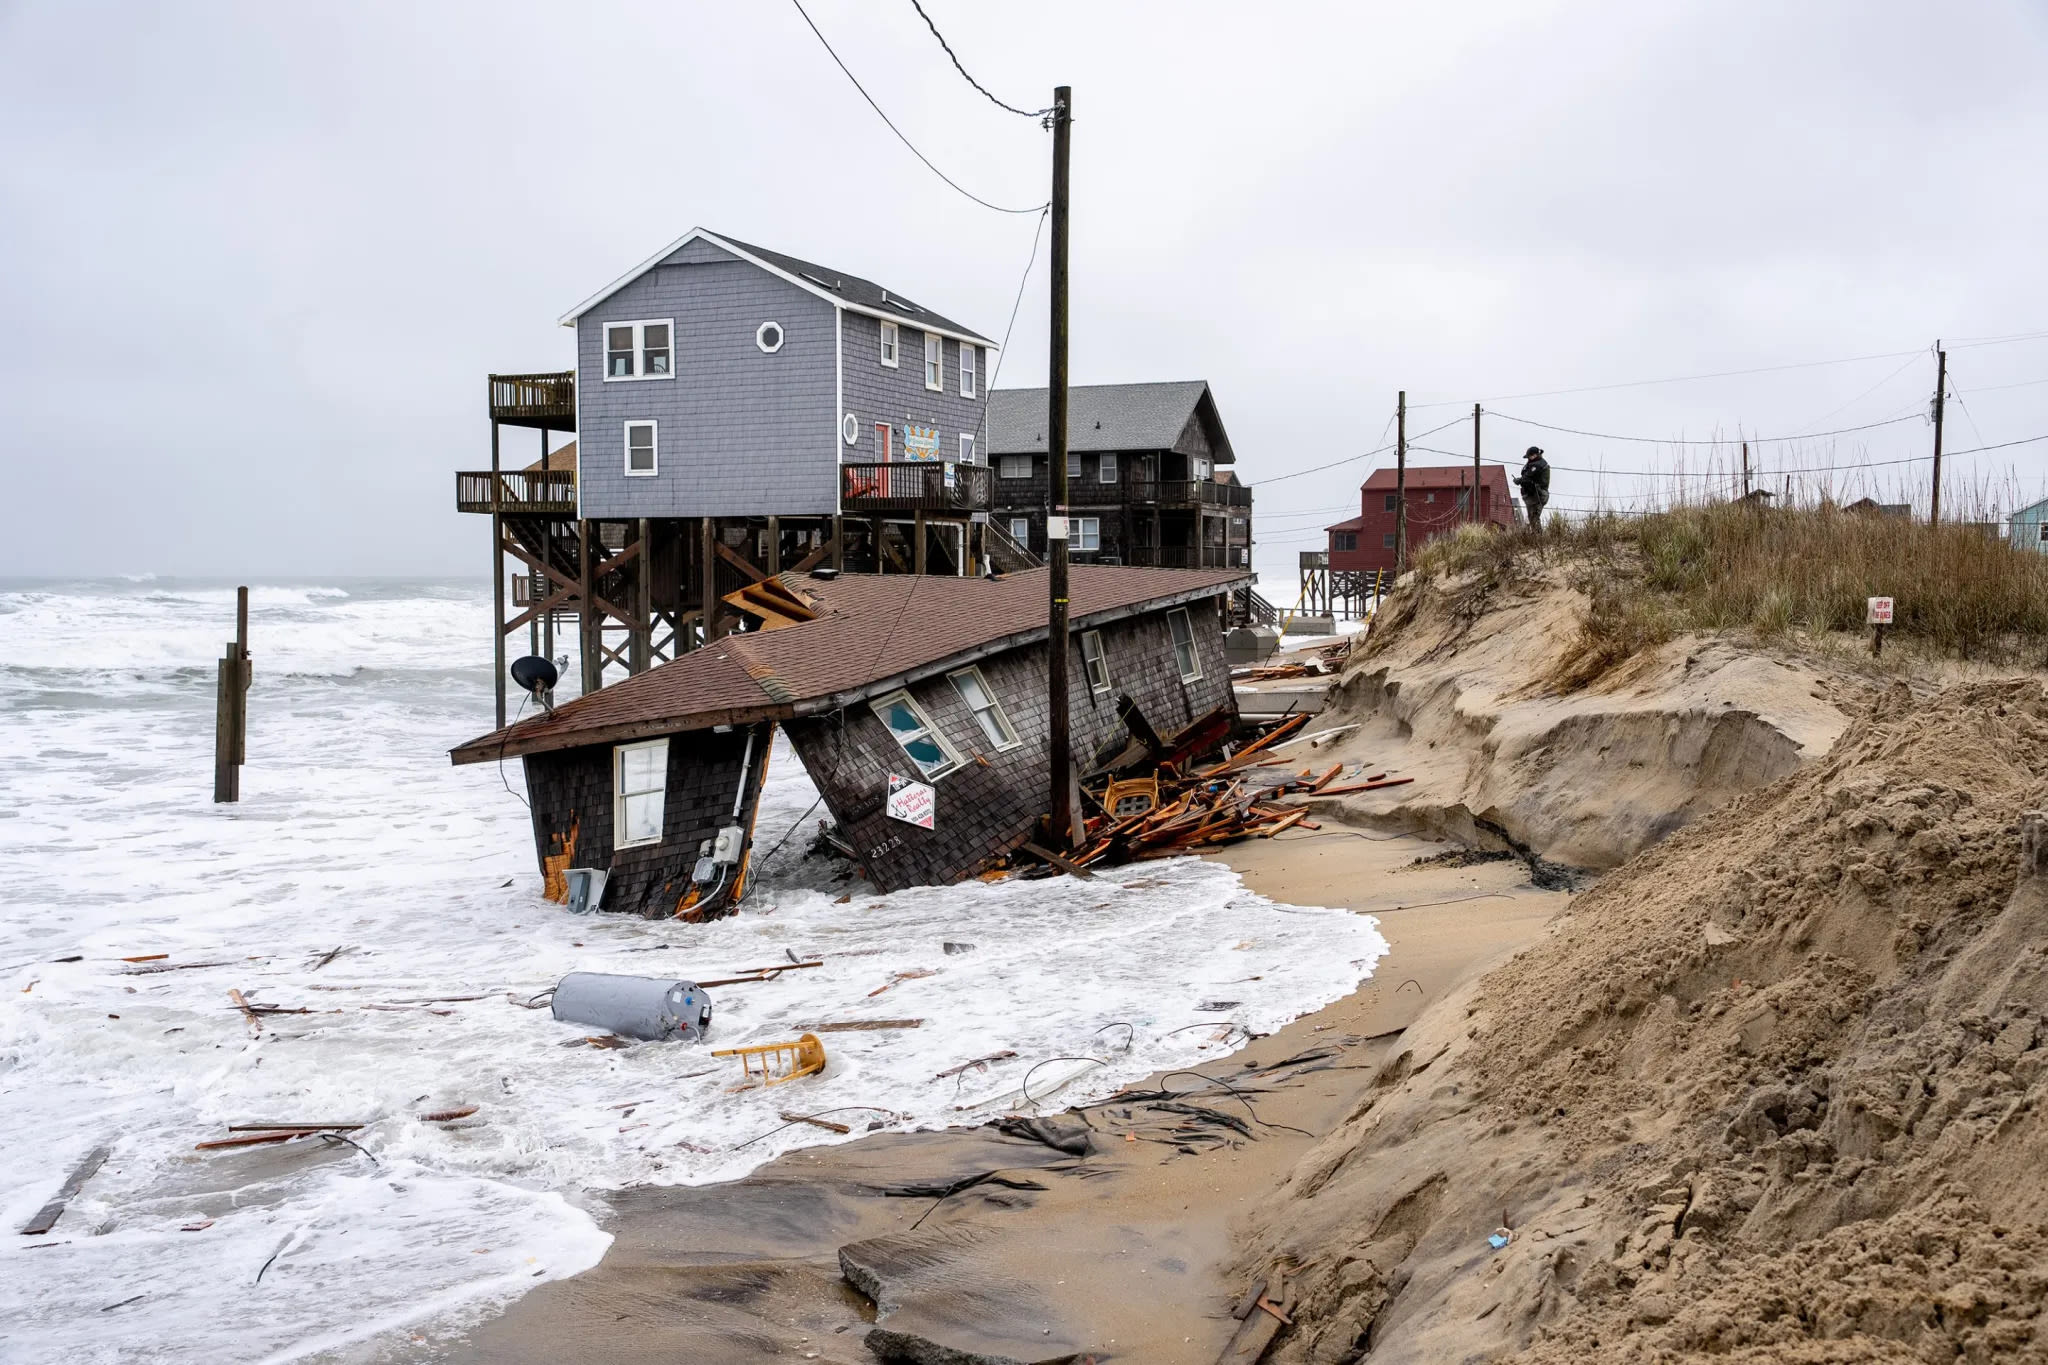 Outer Banks homes are collapsing due to climate change, but U.S. coastal property values are booming anyway